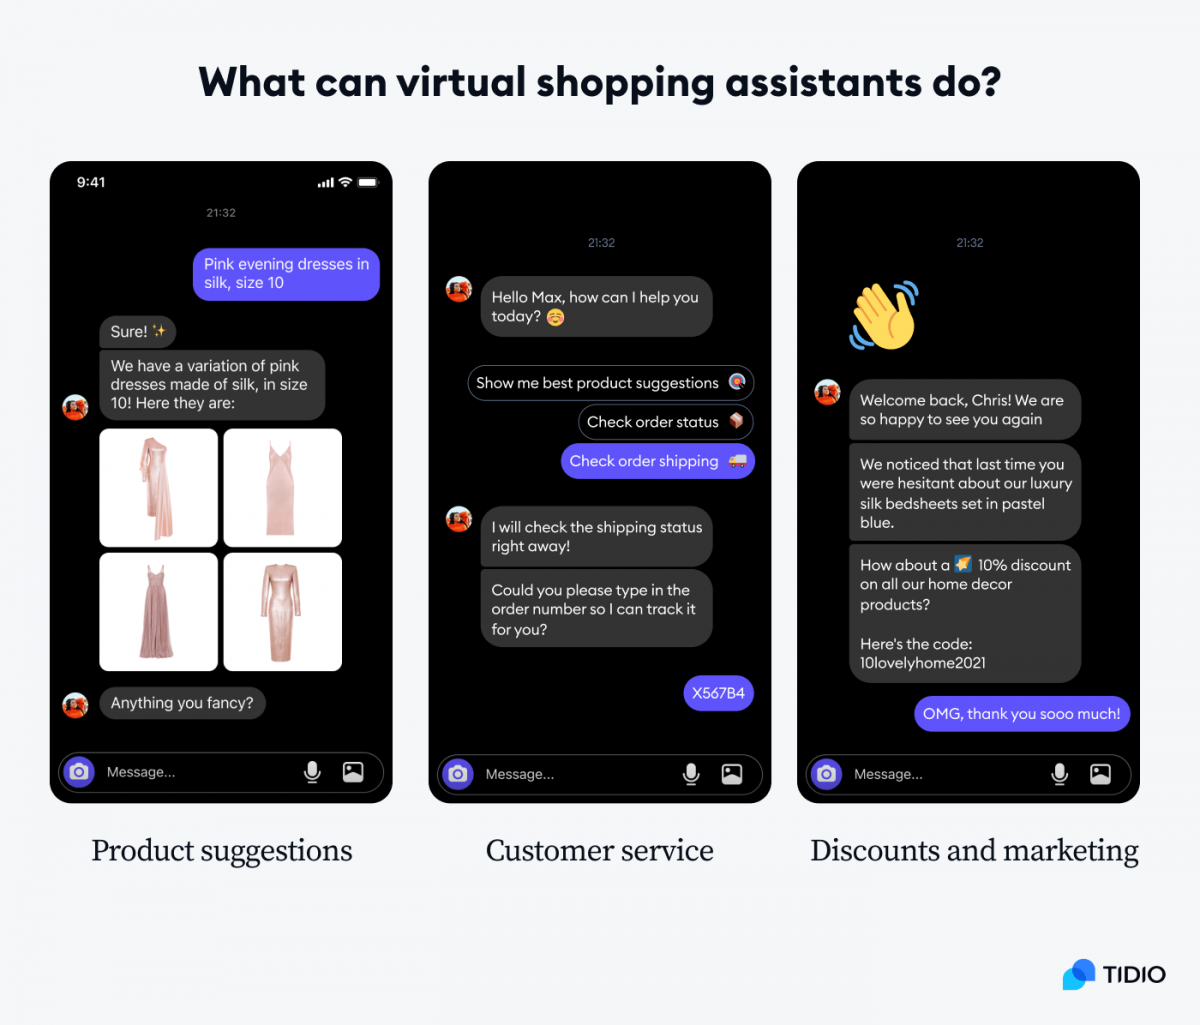 Infographic presenting 3 things that virtual shopping assistants can do: product suggestions, customer service, discounts and marketing